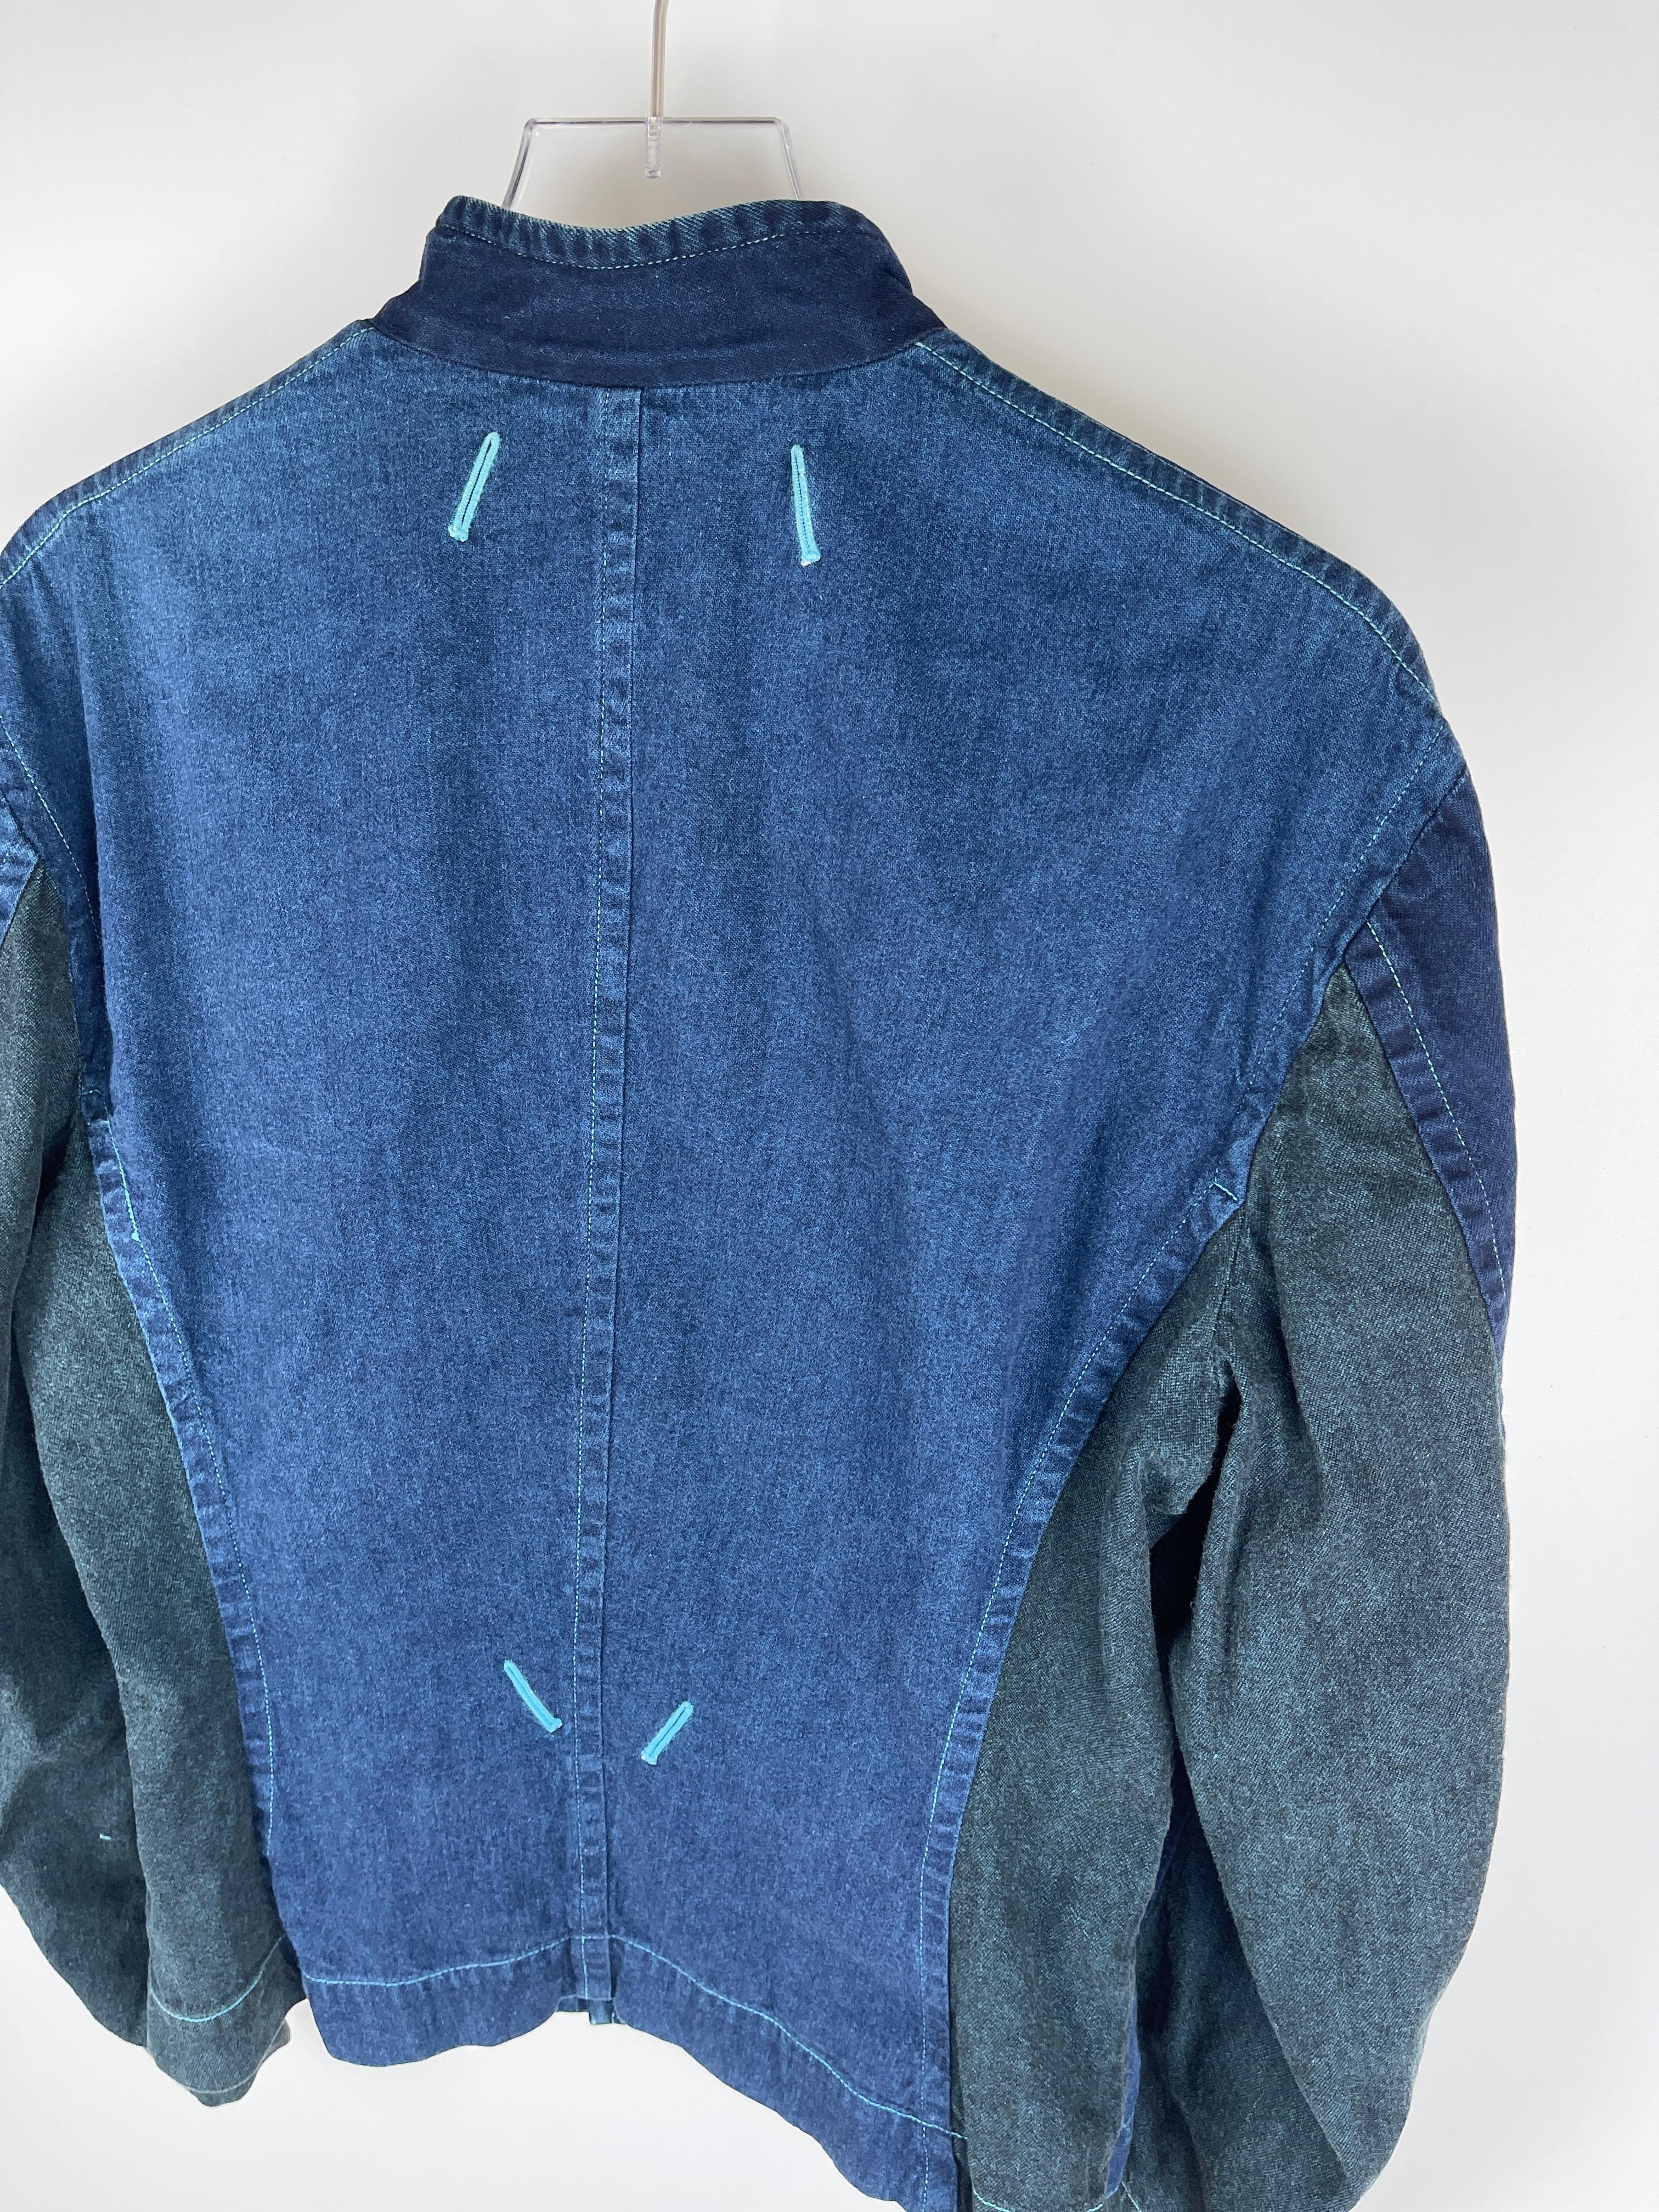 Issey Miyake A/W1993 Chambre Denim Jacket  In Excellent Condition For Sale In Seattle, WA